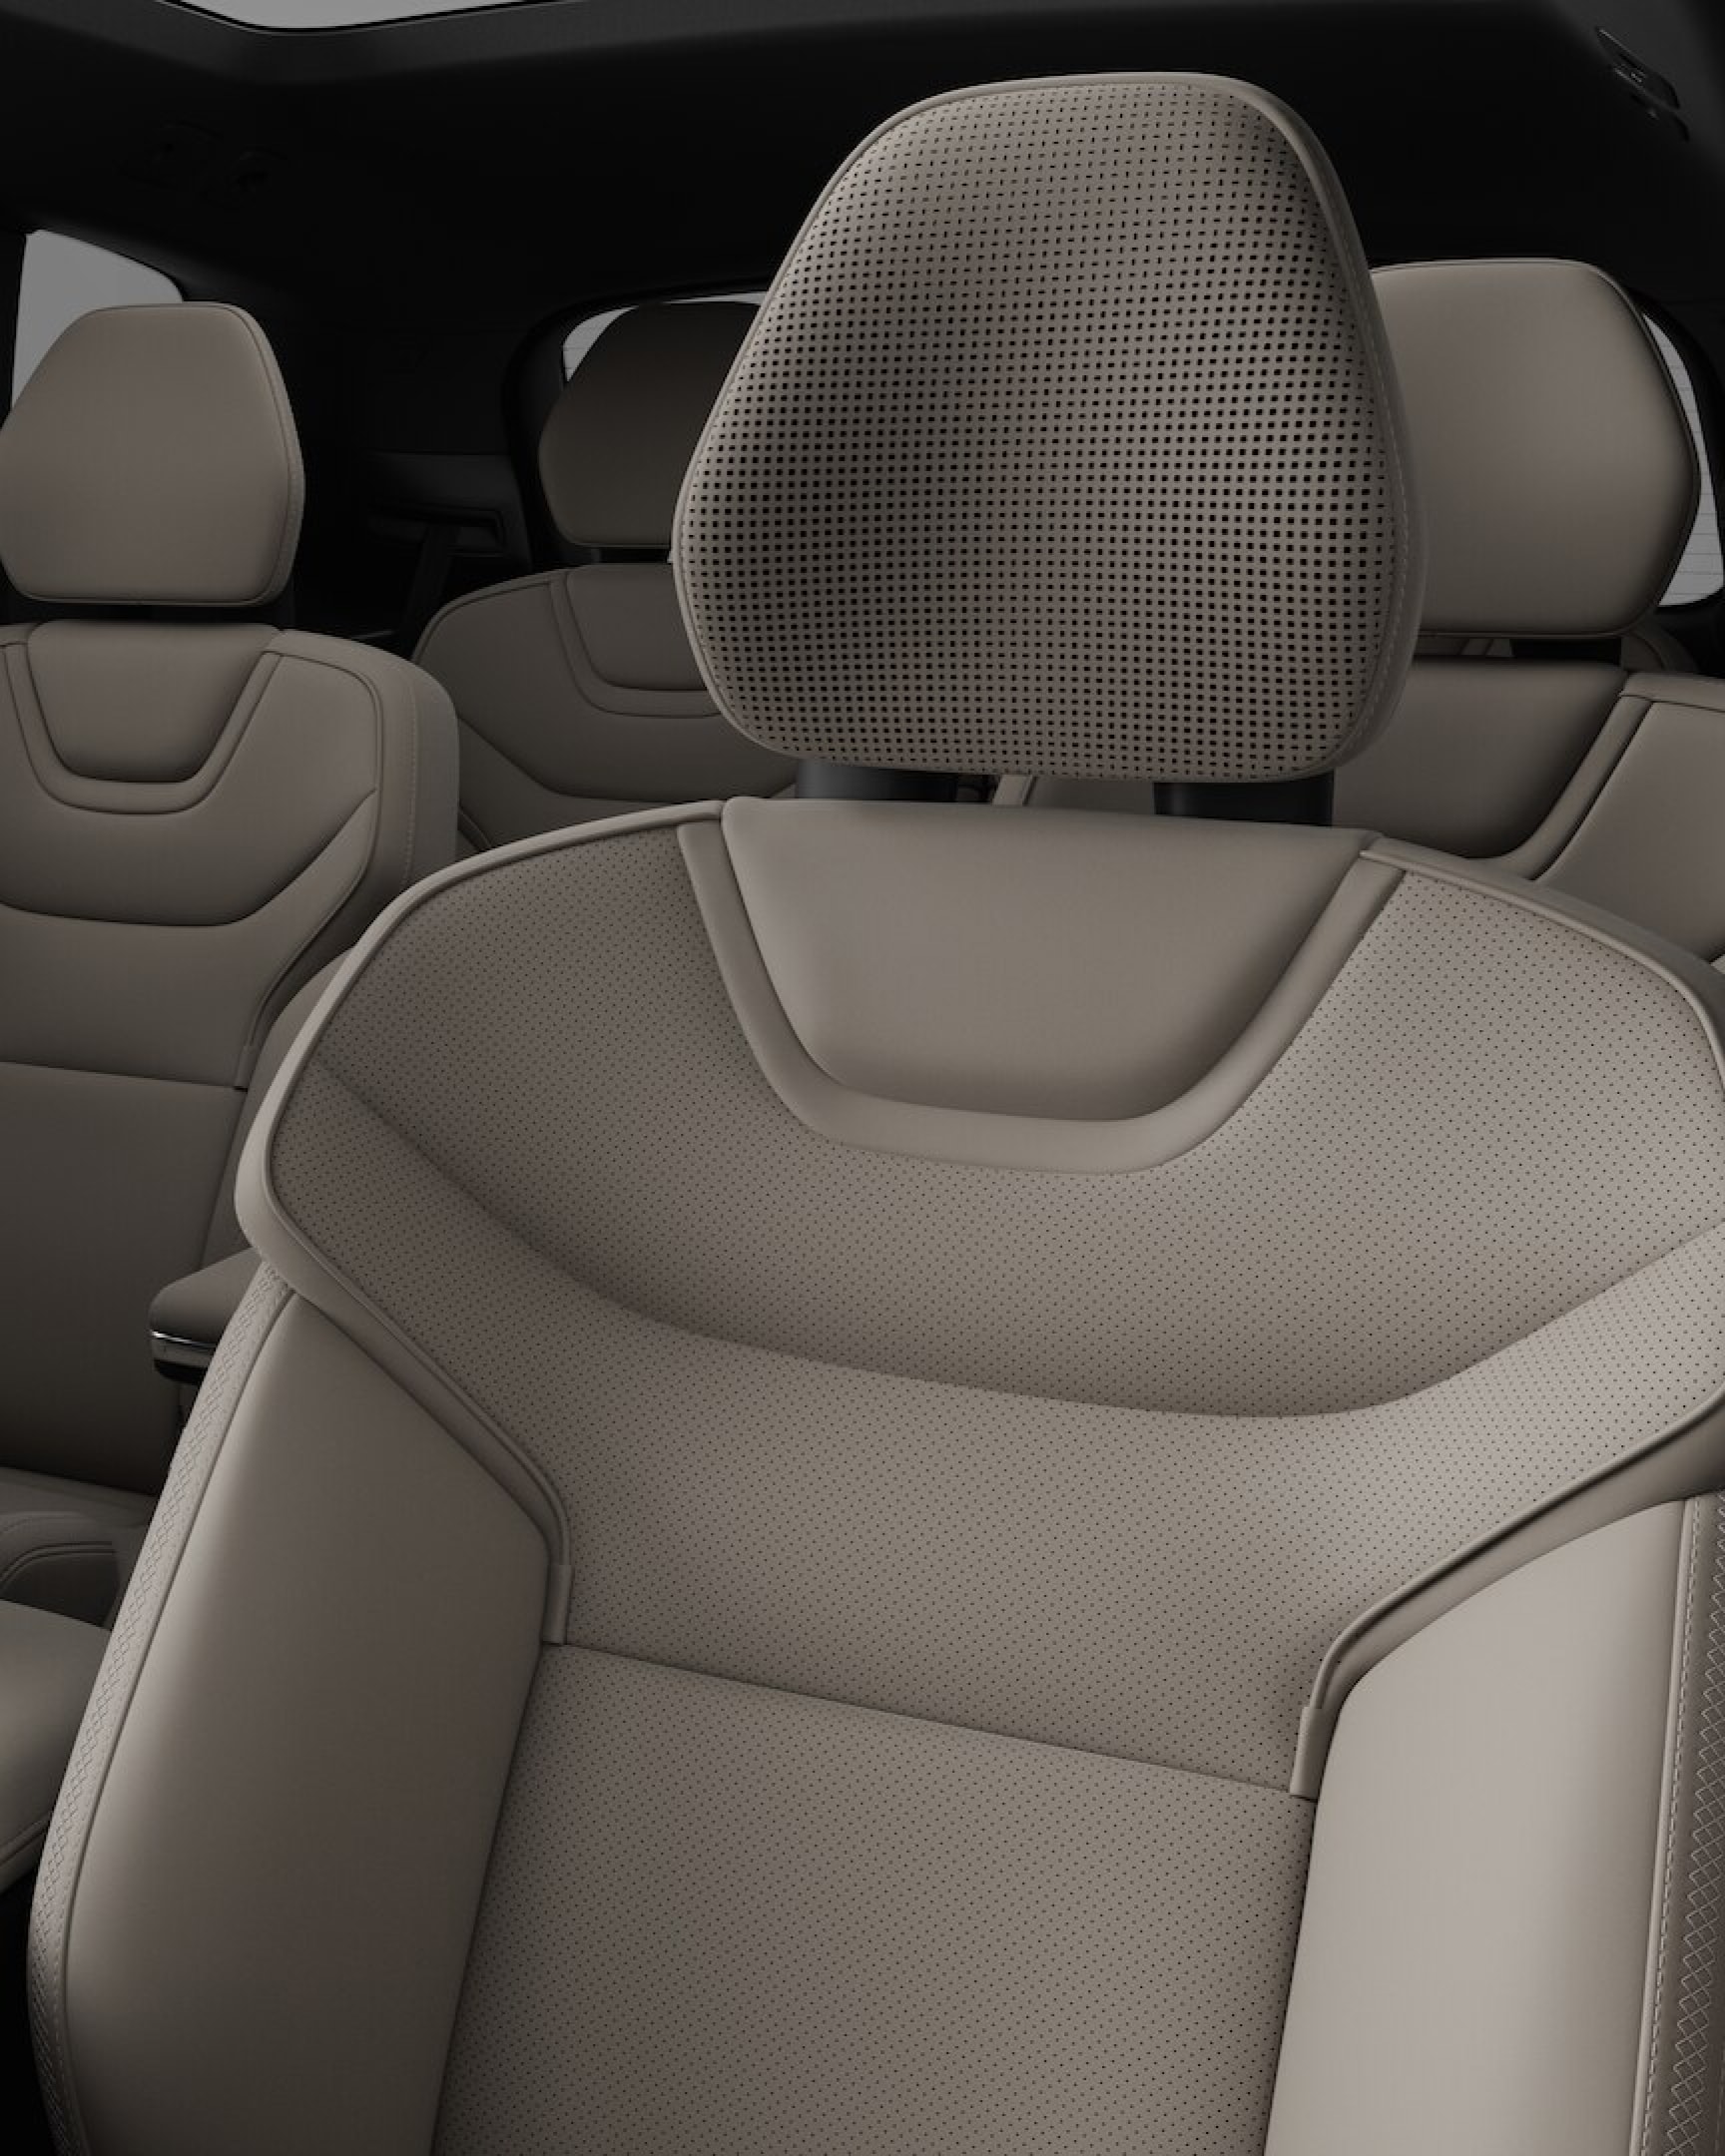 The 7-seat cabin of a Volvo EX90. 